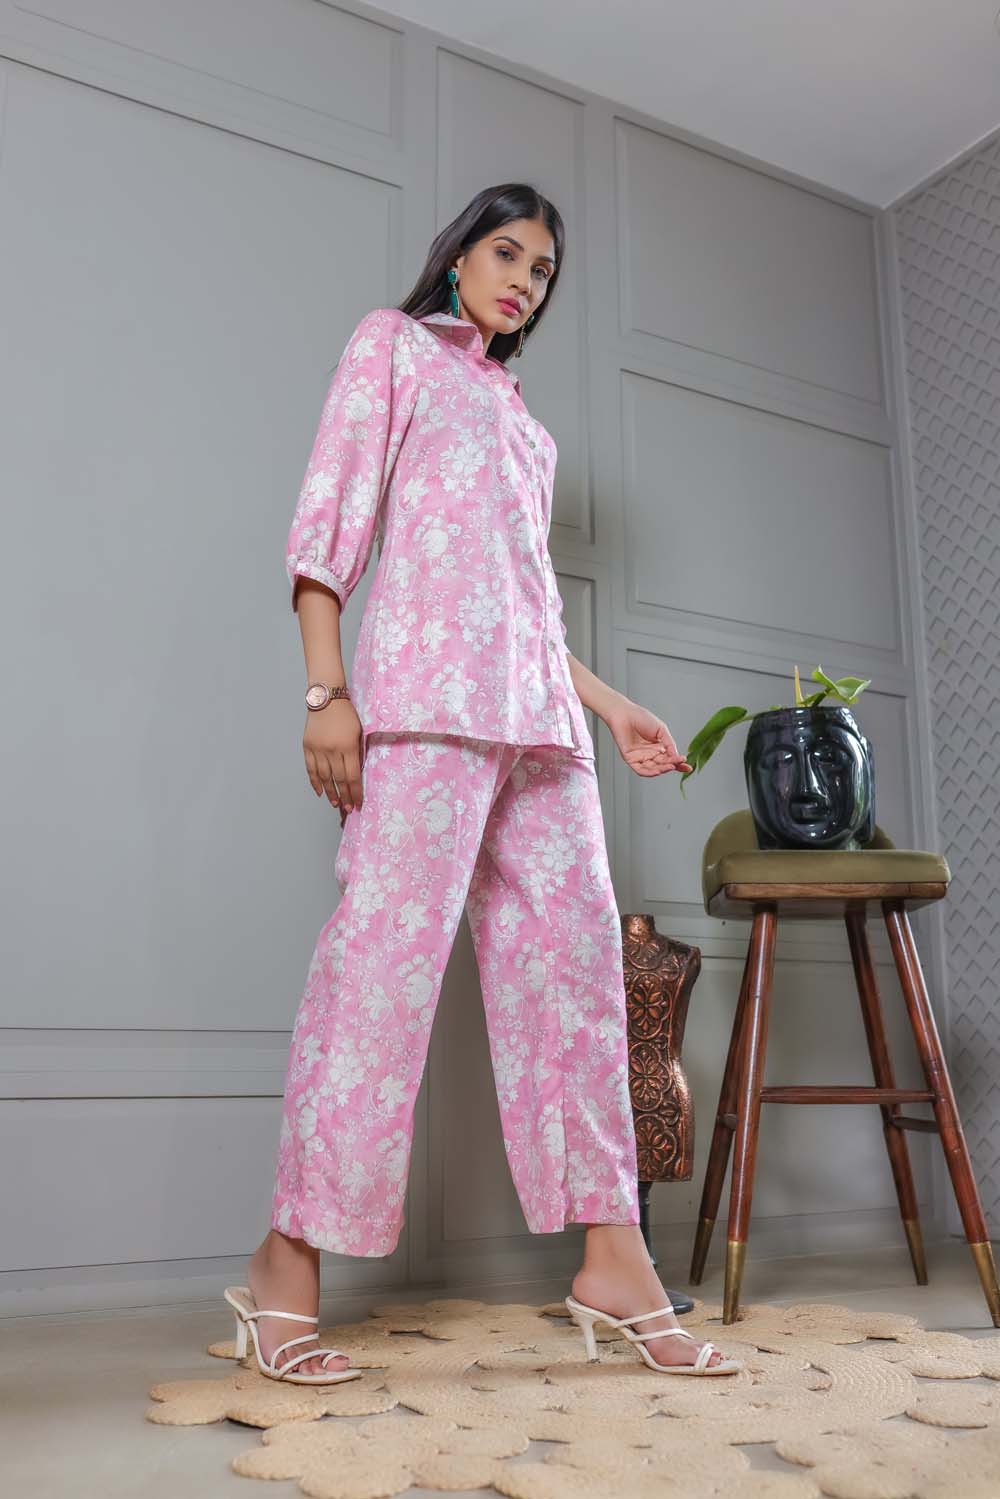 Bougainvillea - Baby Pink with White Co-ord Top and Pant Set